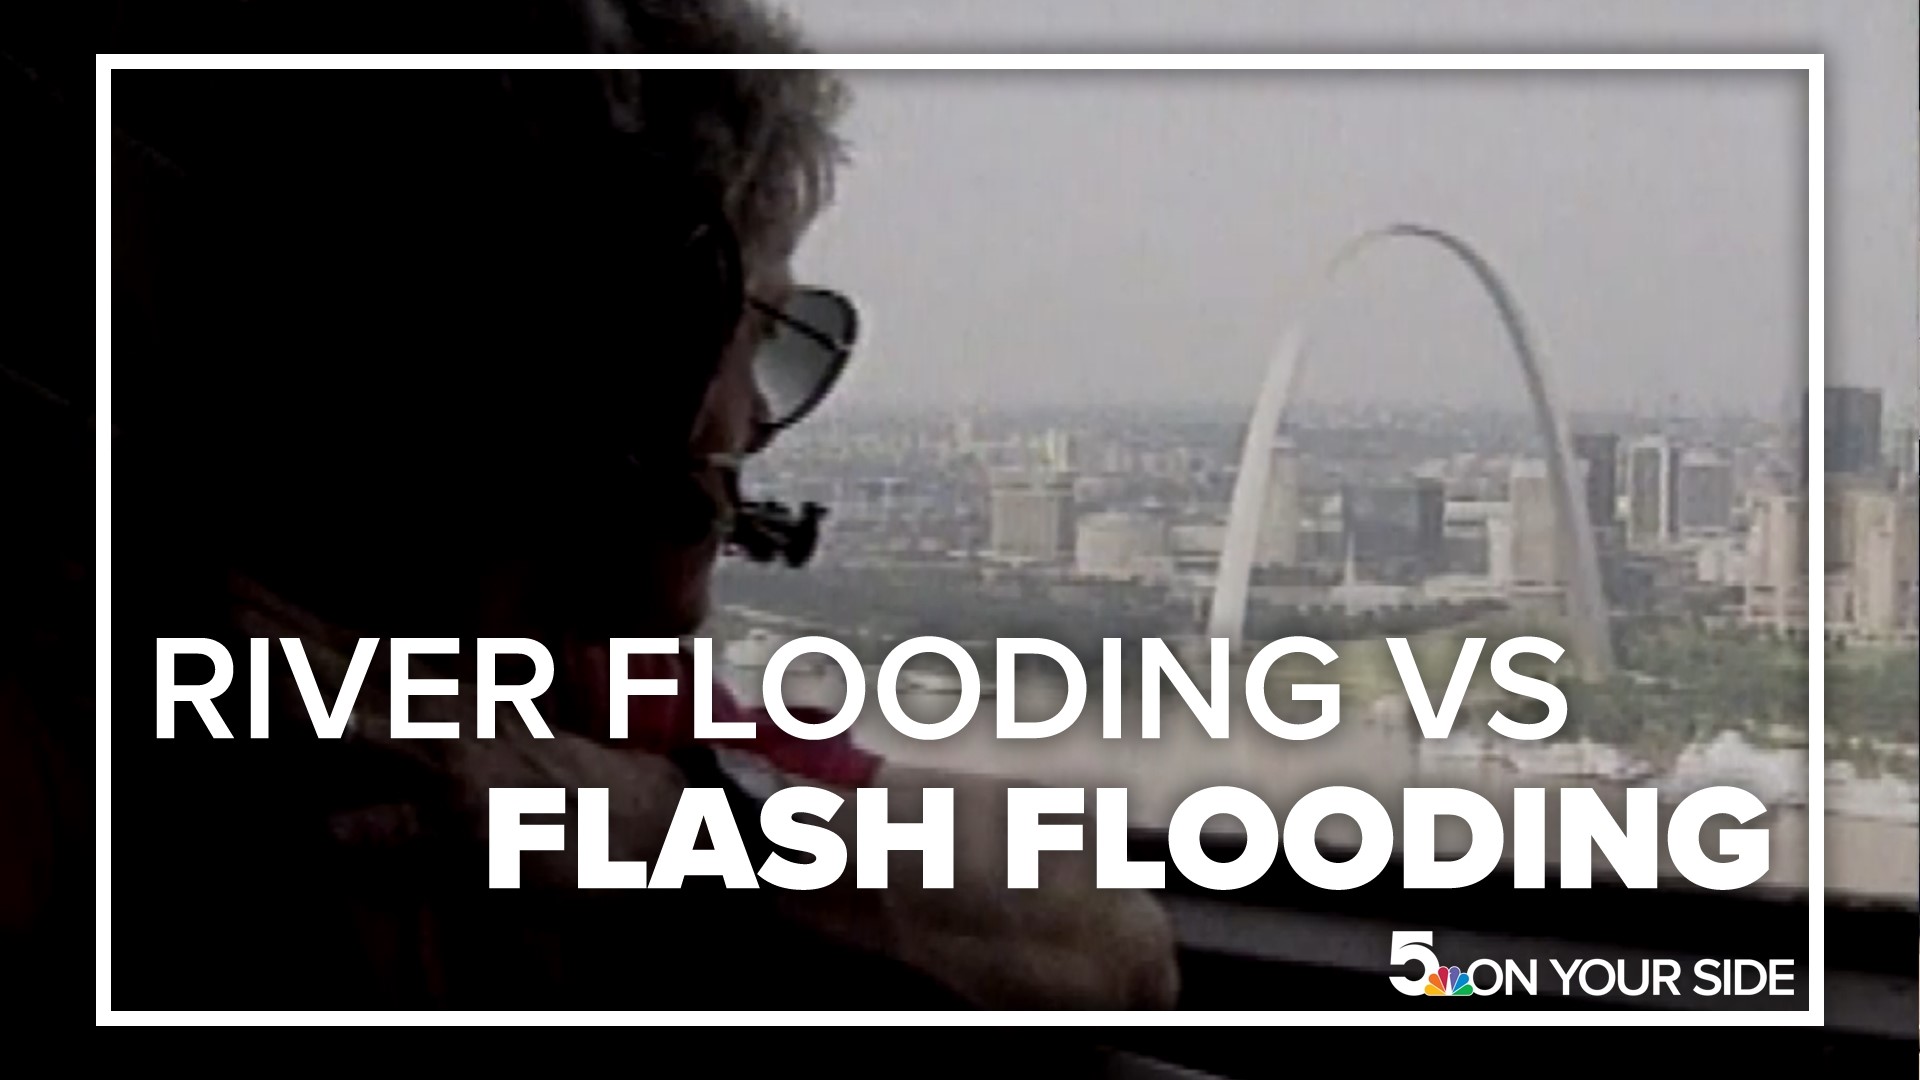 Heavy rain and snow melt can nourish nature. It can also cause devastating floods of different kinds. Learn about the floods that affect St. Louis.